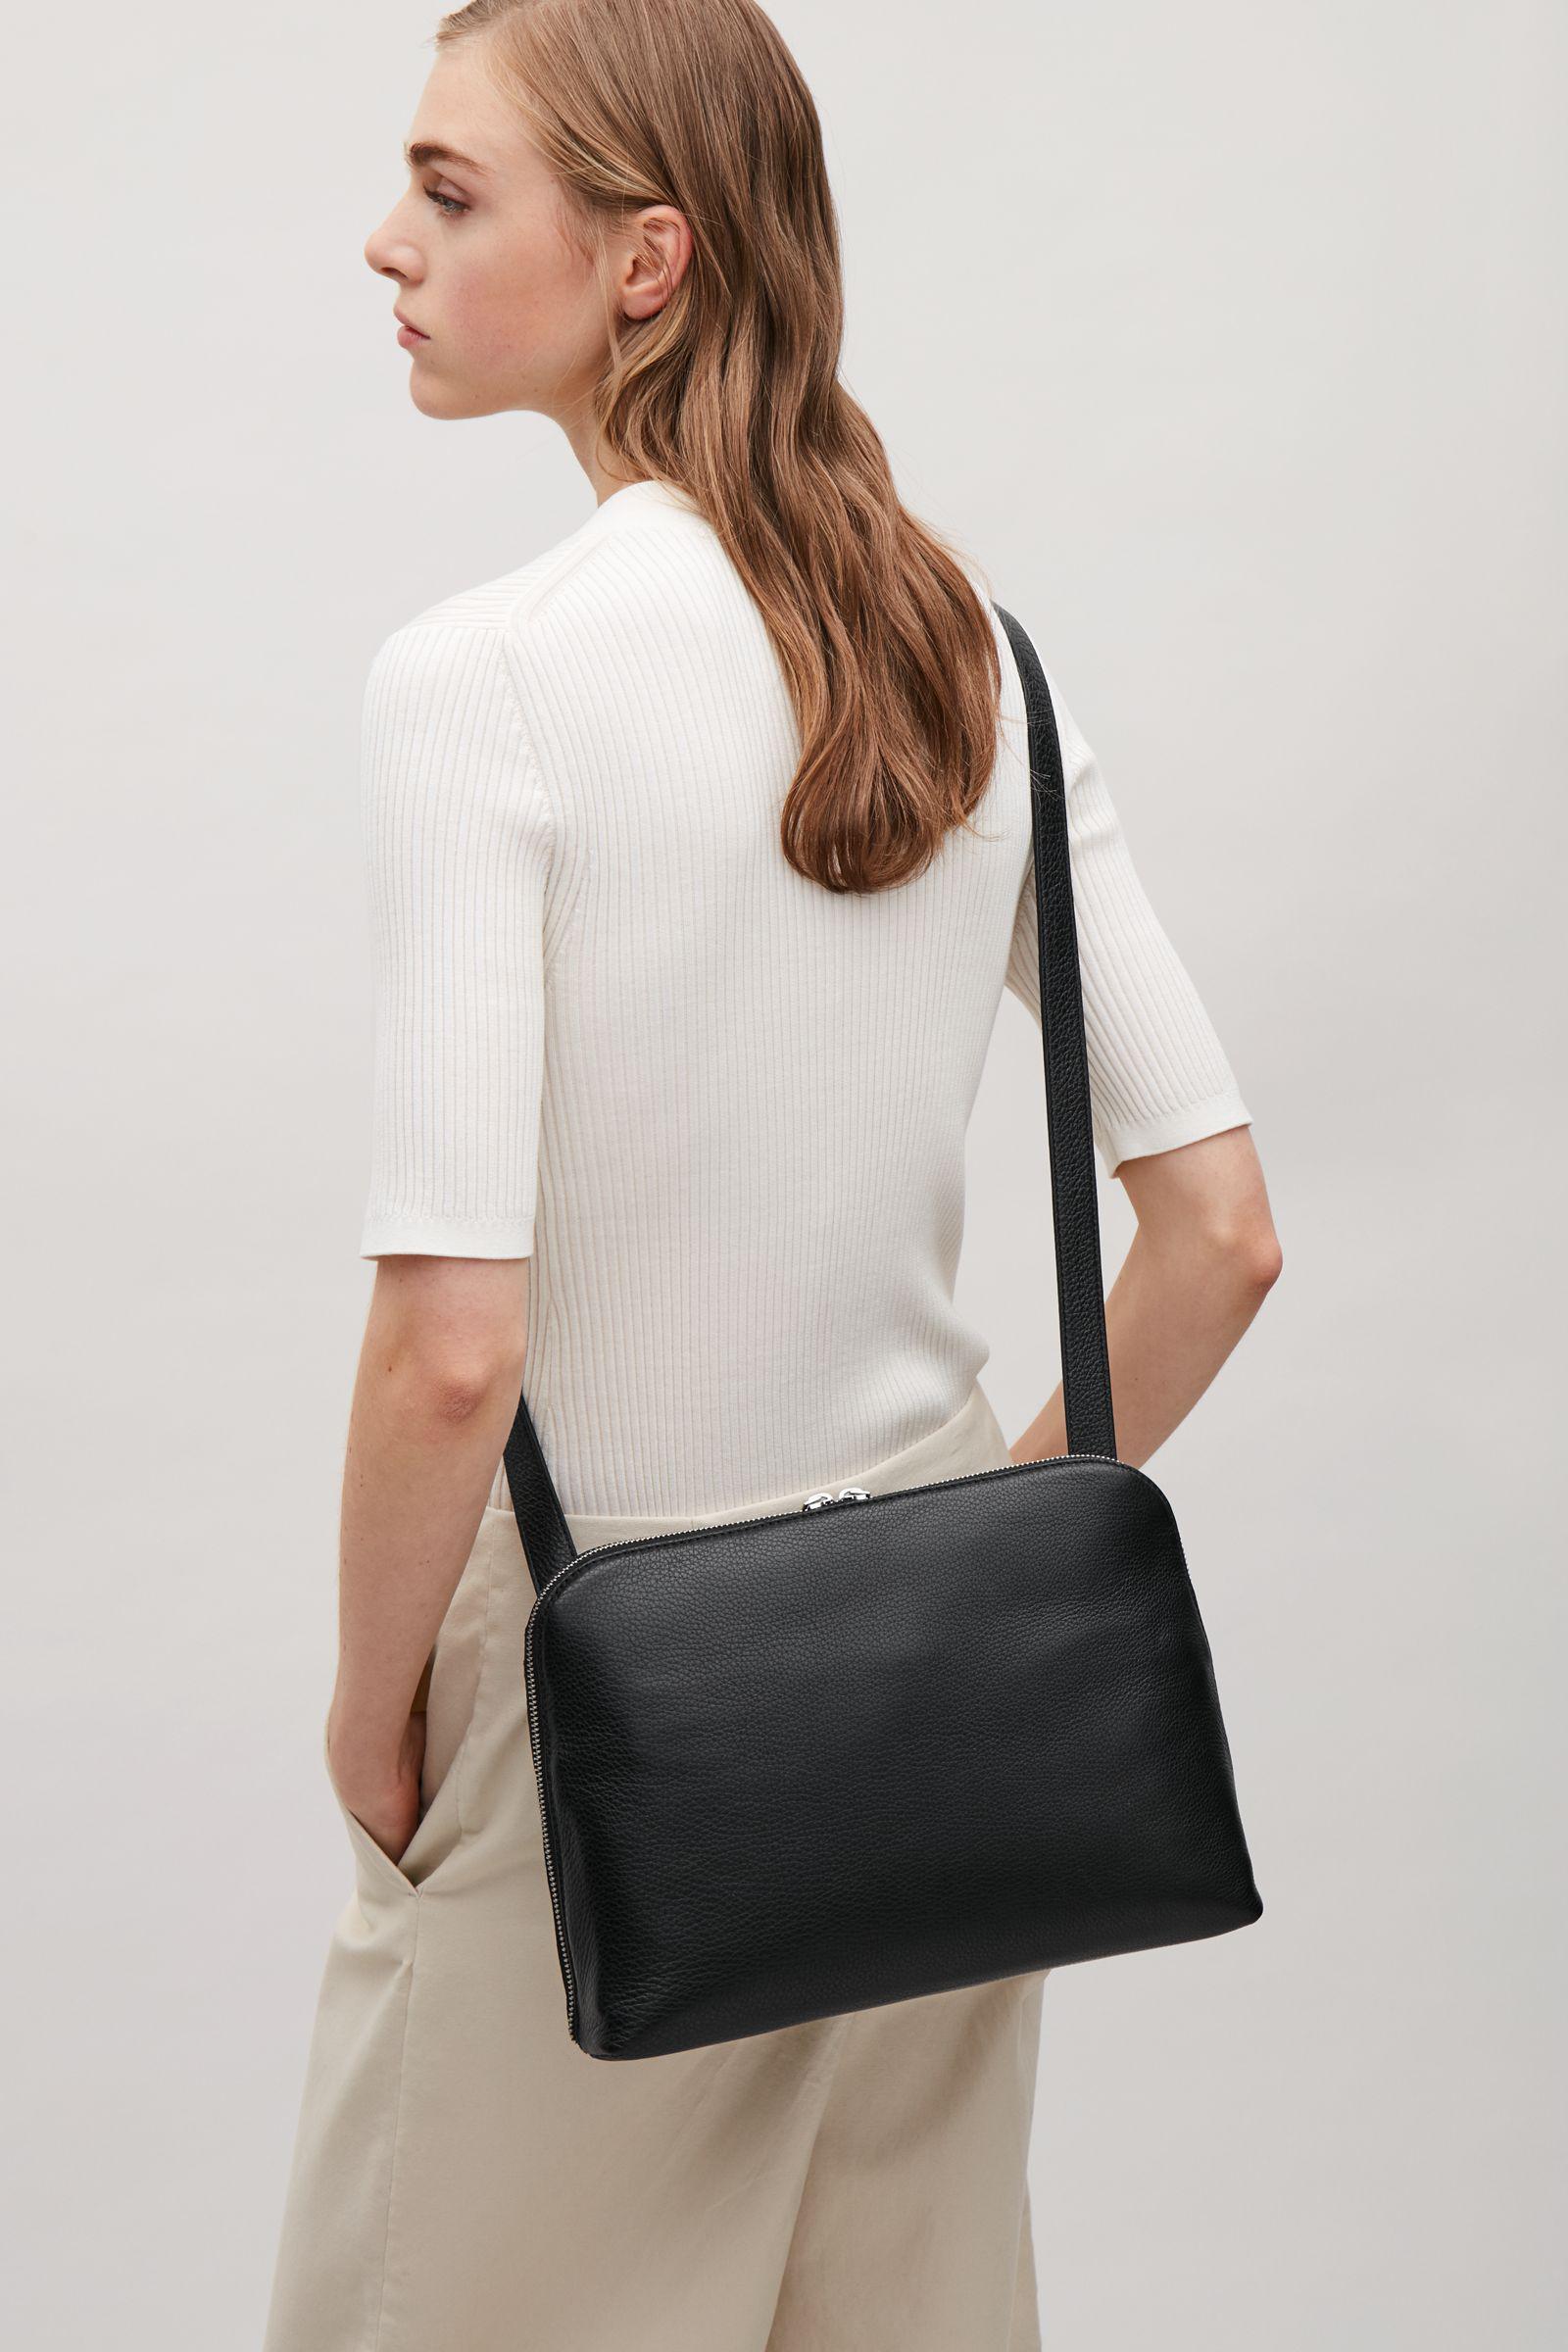 COS Leather Constructed Shoulder Bag in Black - Lyst